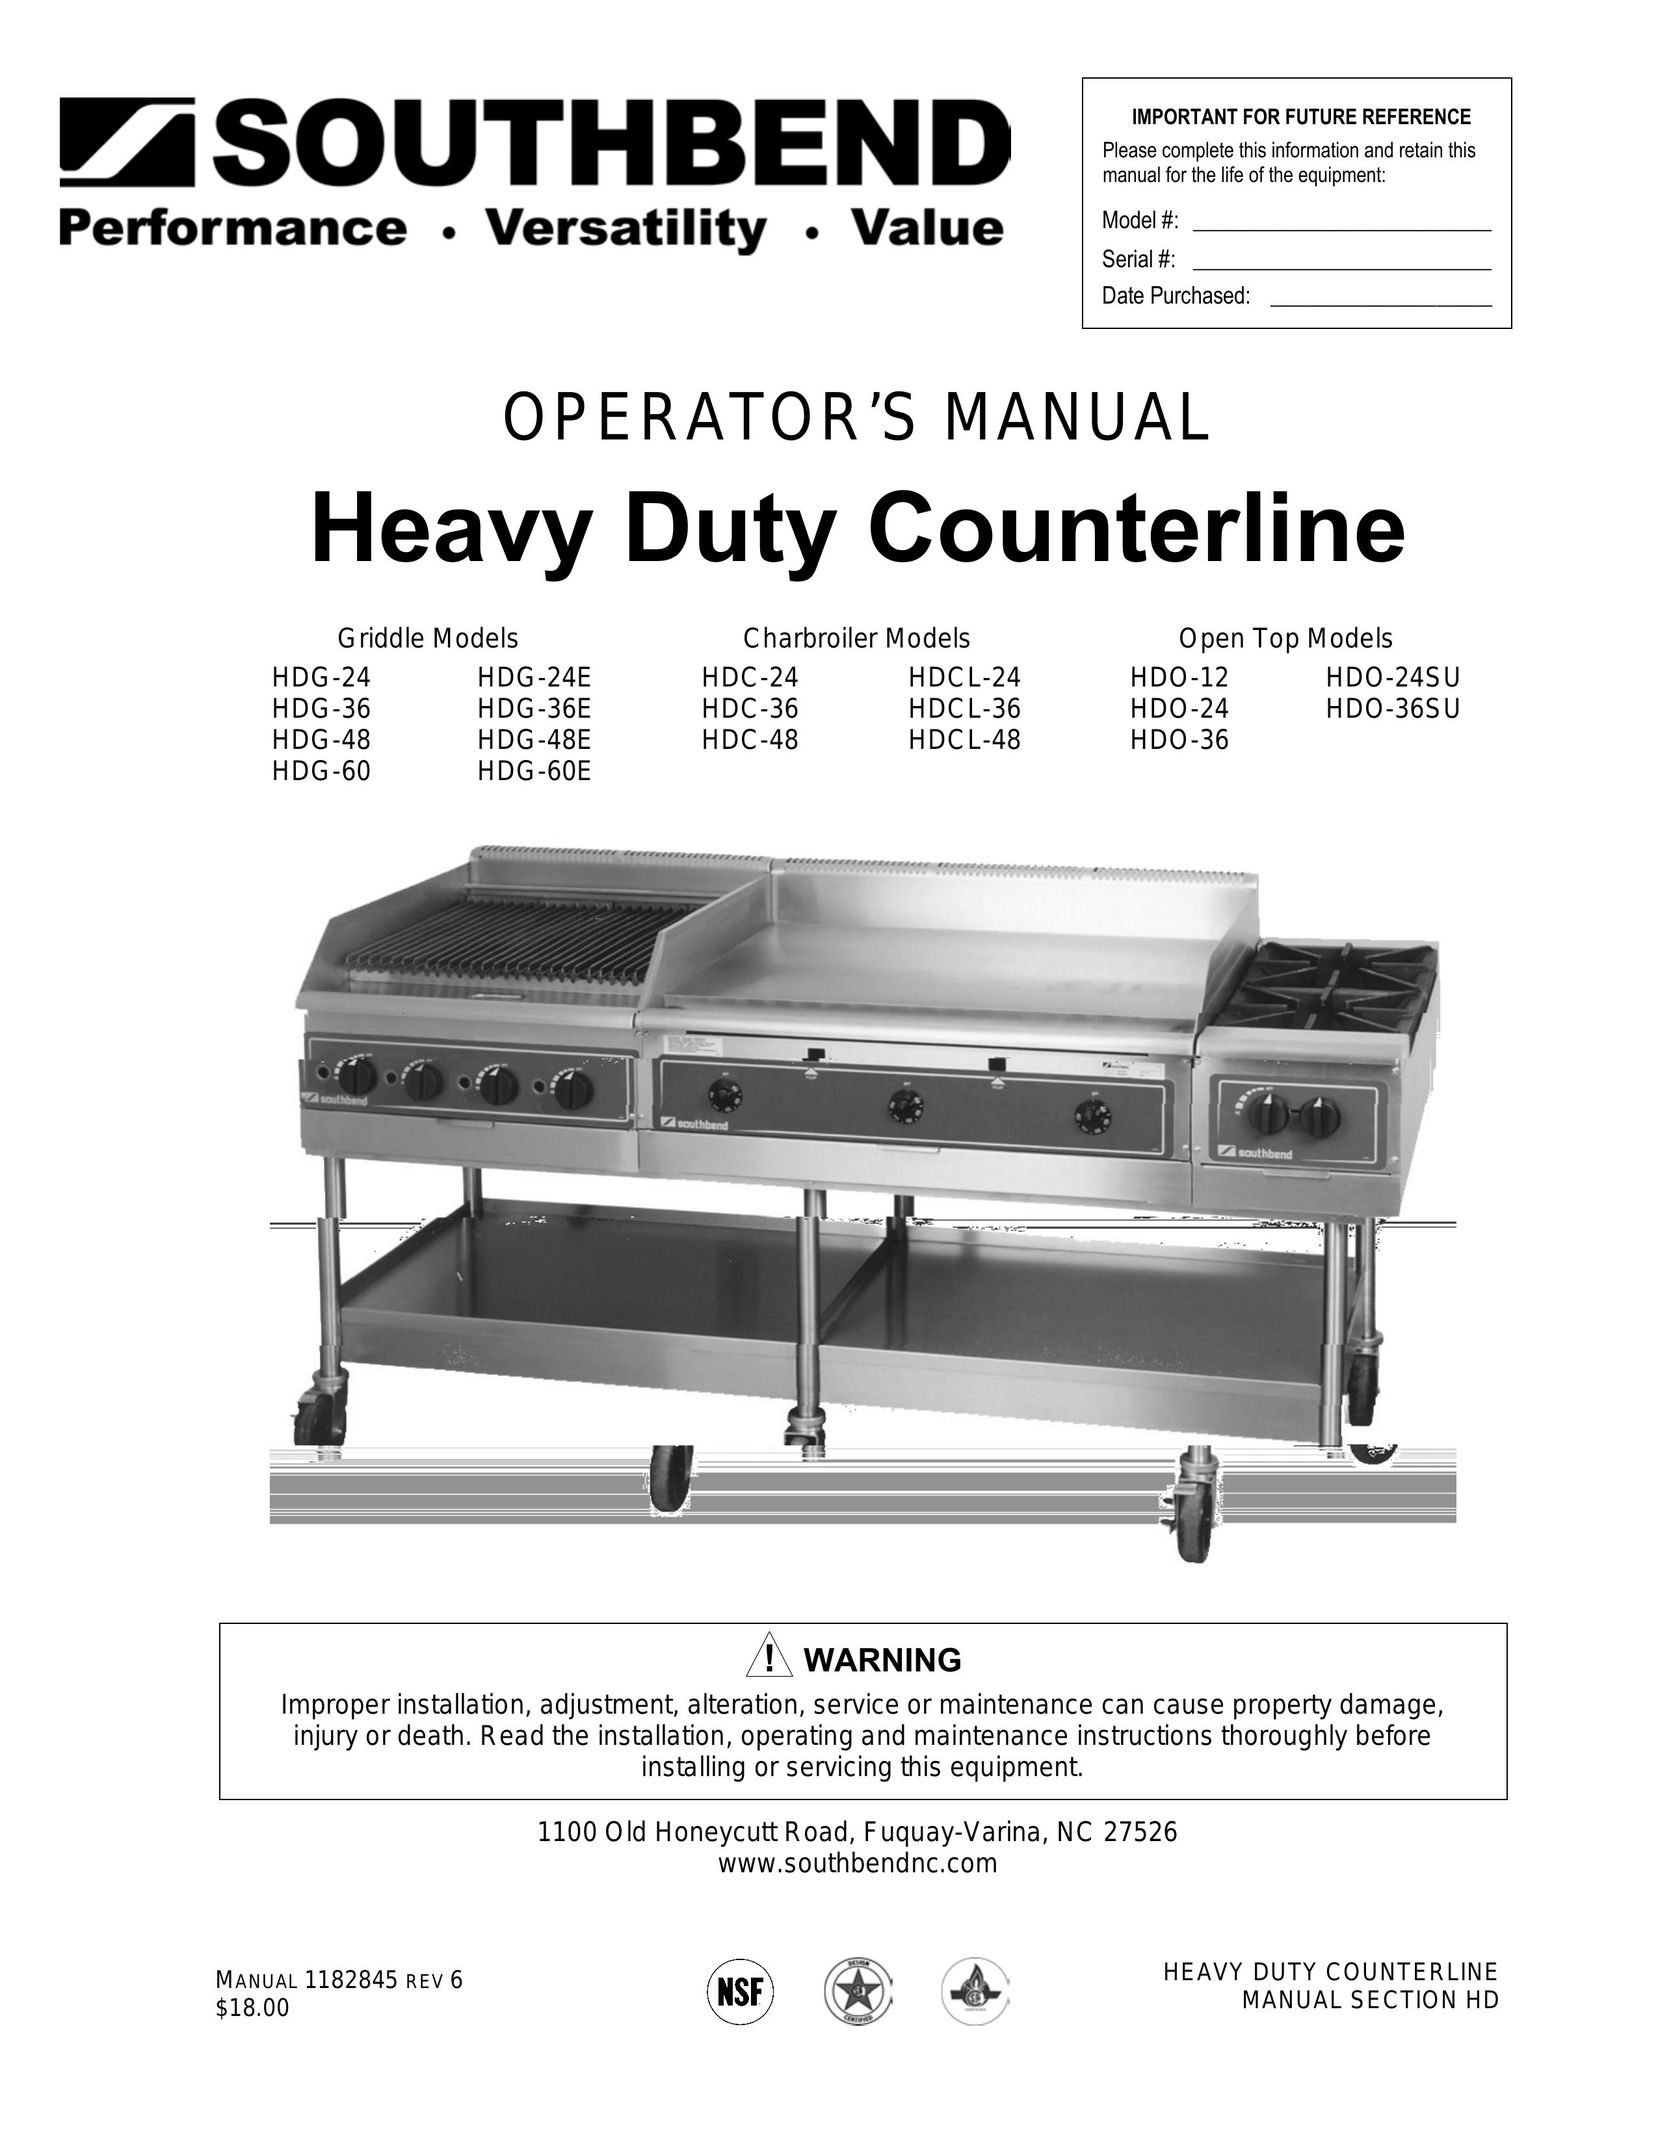 Southbend HDO-24 Cooktop User Manual